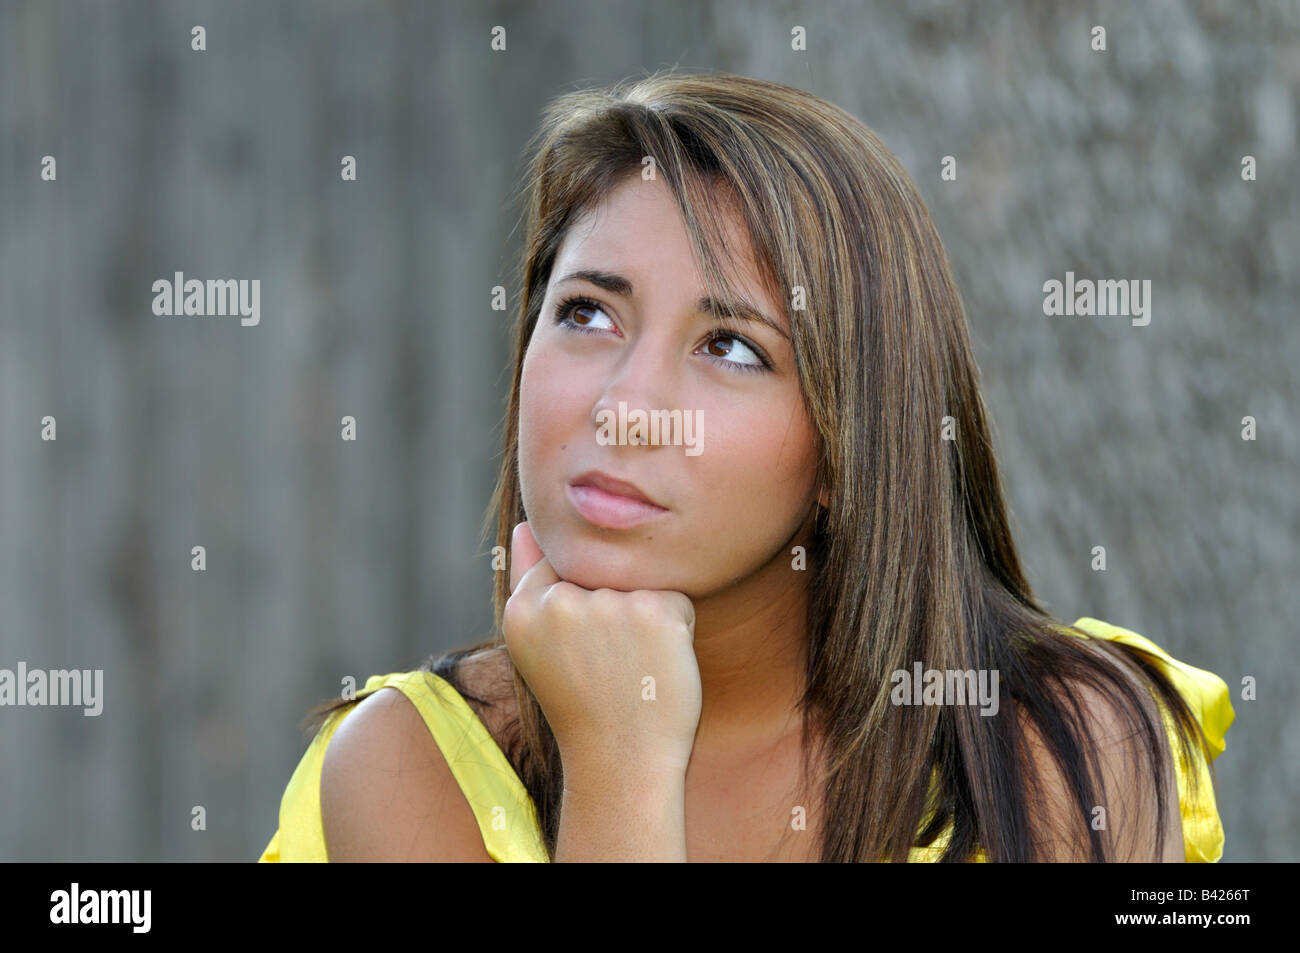 A pretty caucasian 16 year old girl has an expression of perplexity or wondering or thinking. Conceptual image. Stock Photo